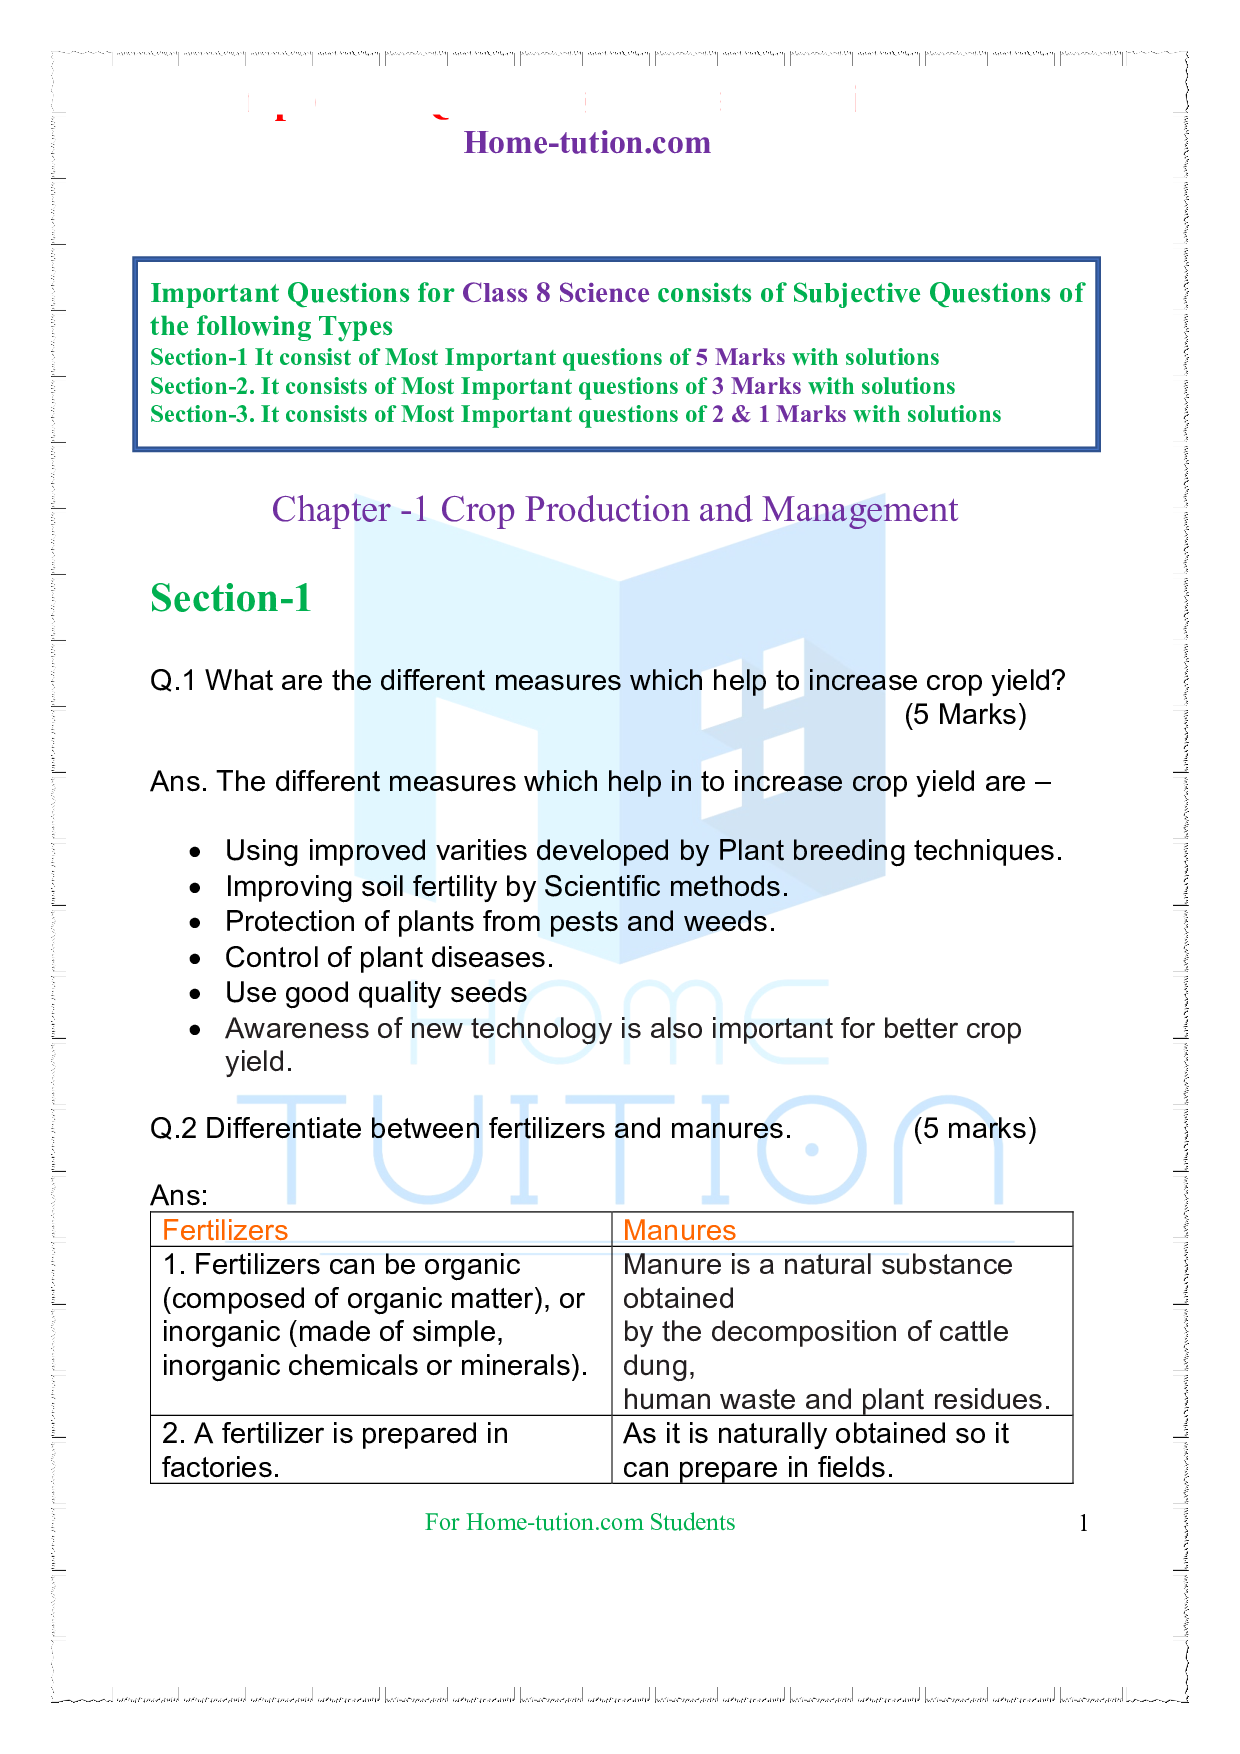 Important Questions for Chapter -1 Crop Production and Management